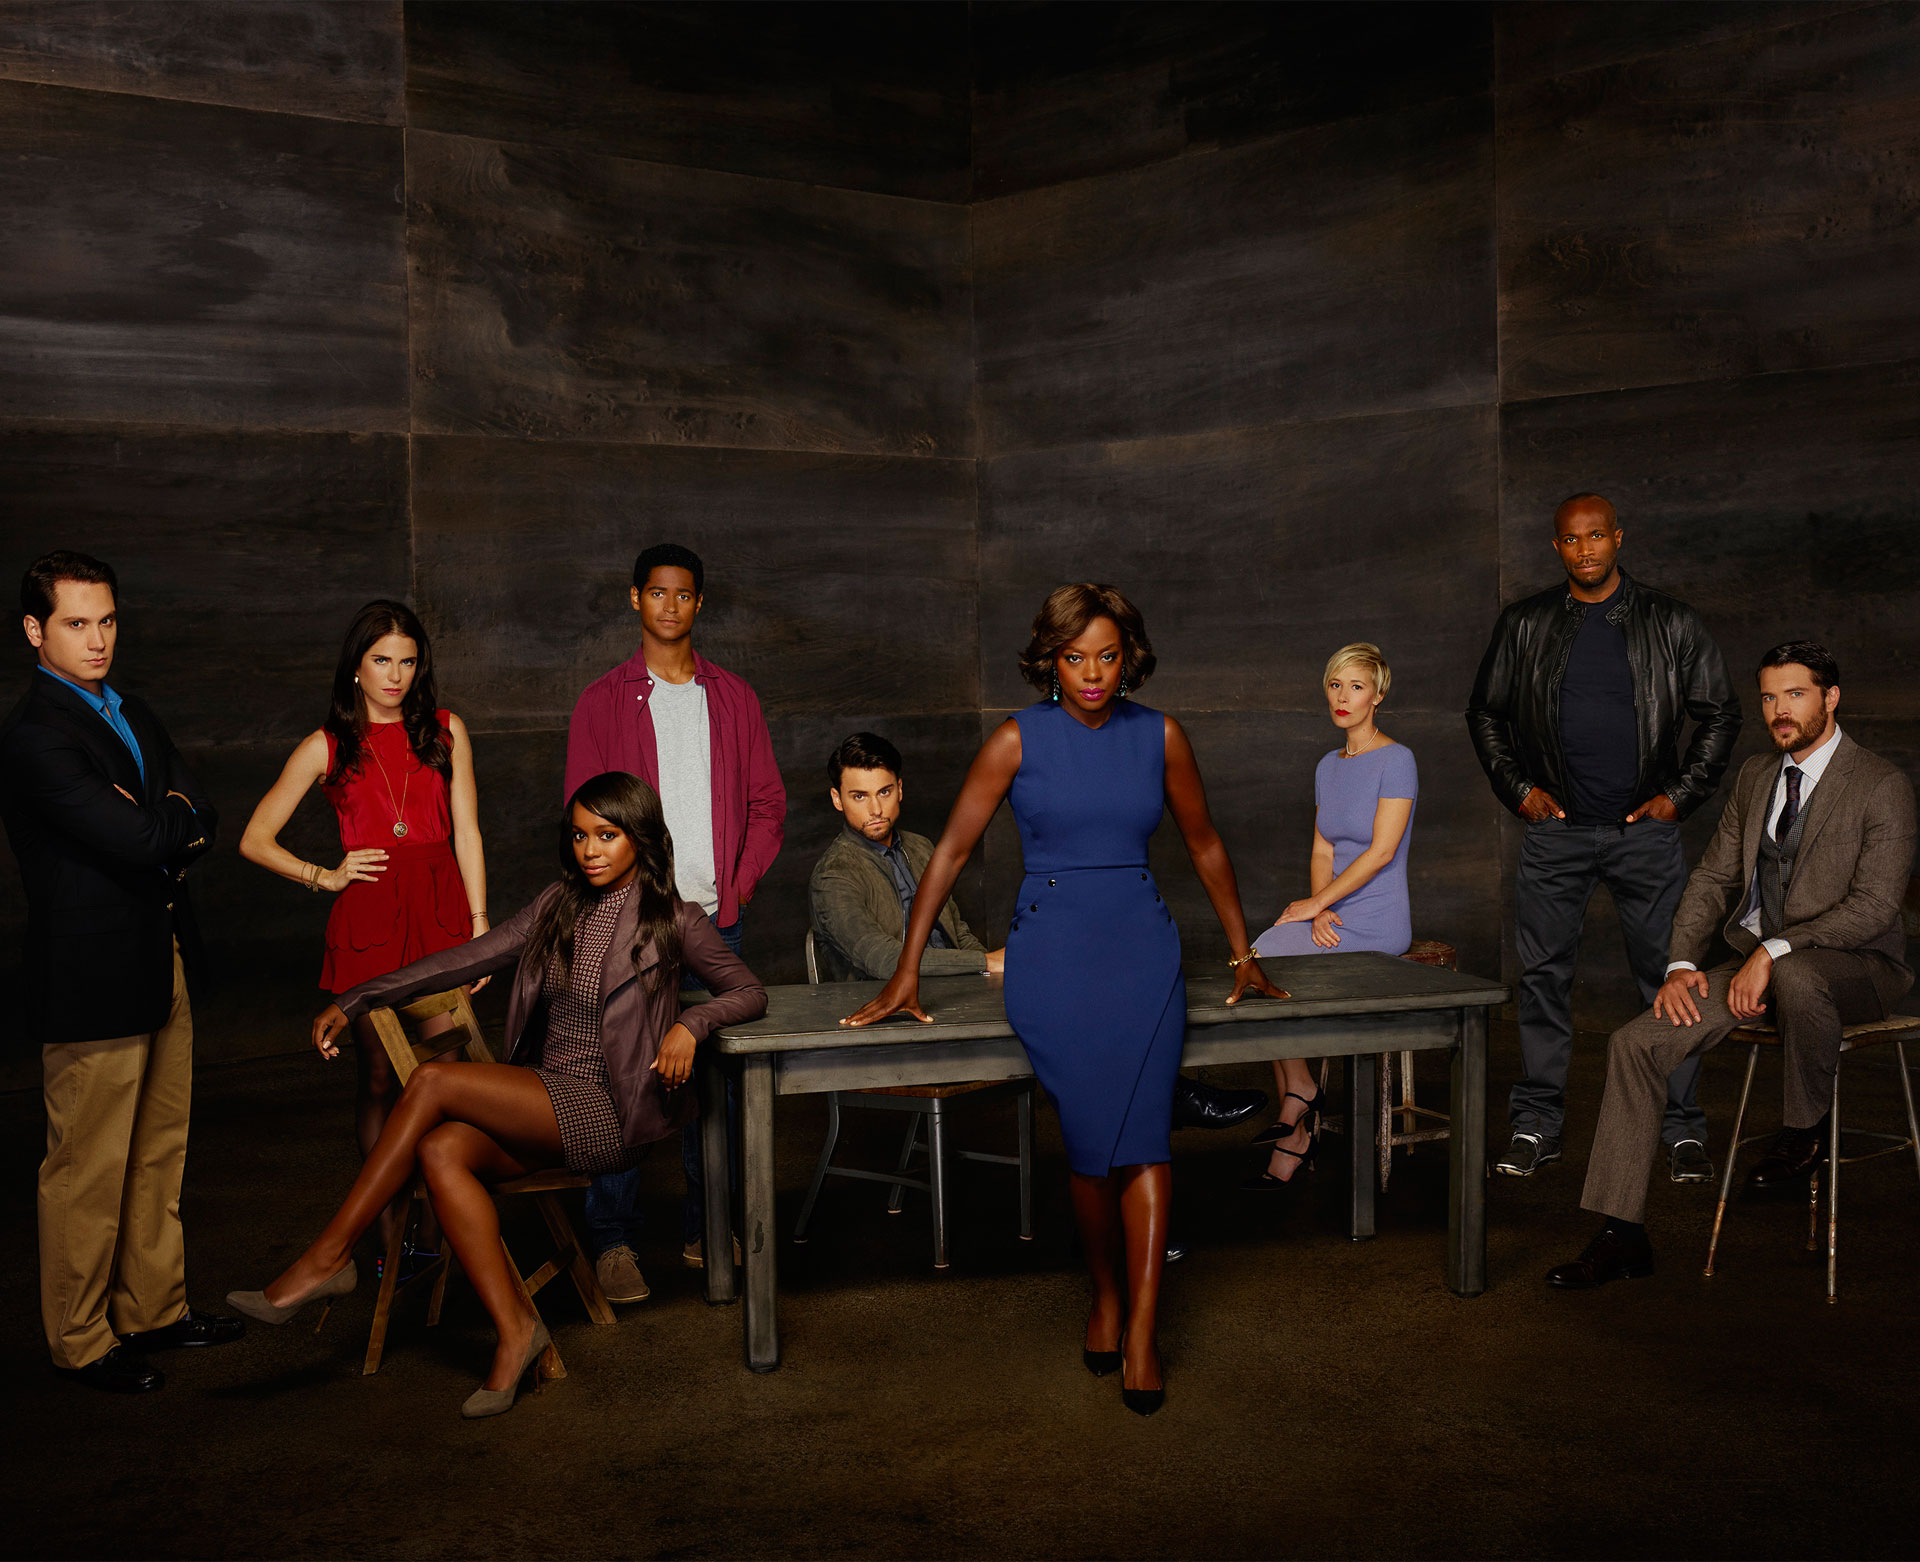 How To Get Away With Murder: 5 burning questions for Season 2